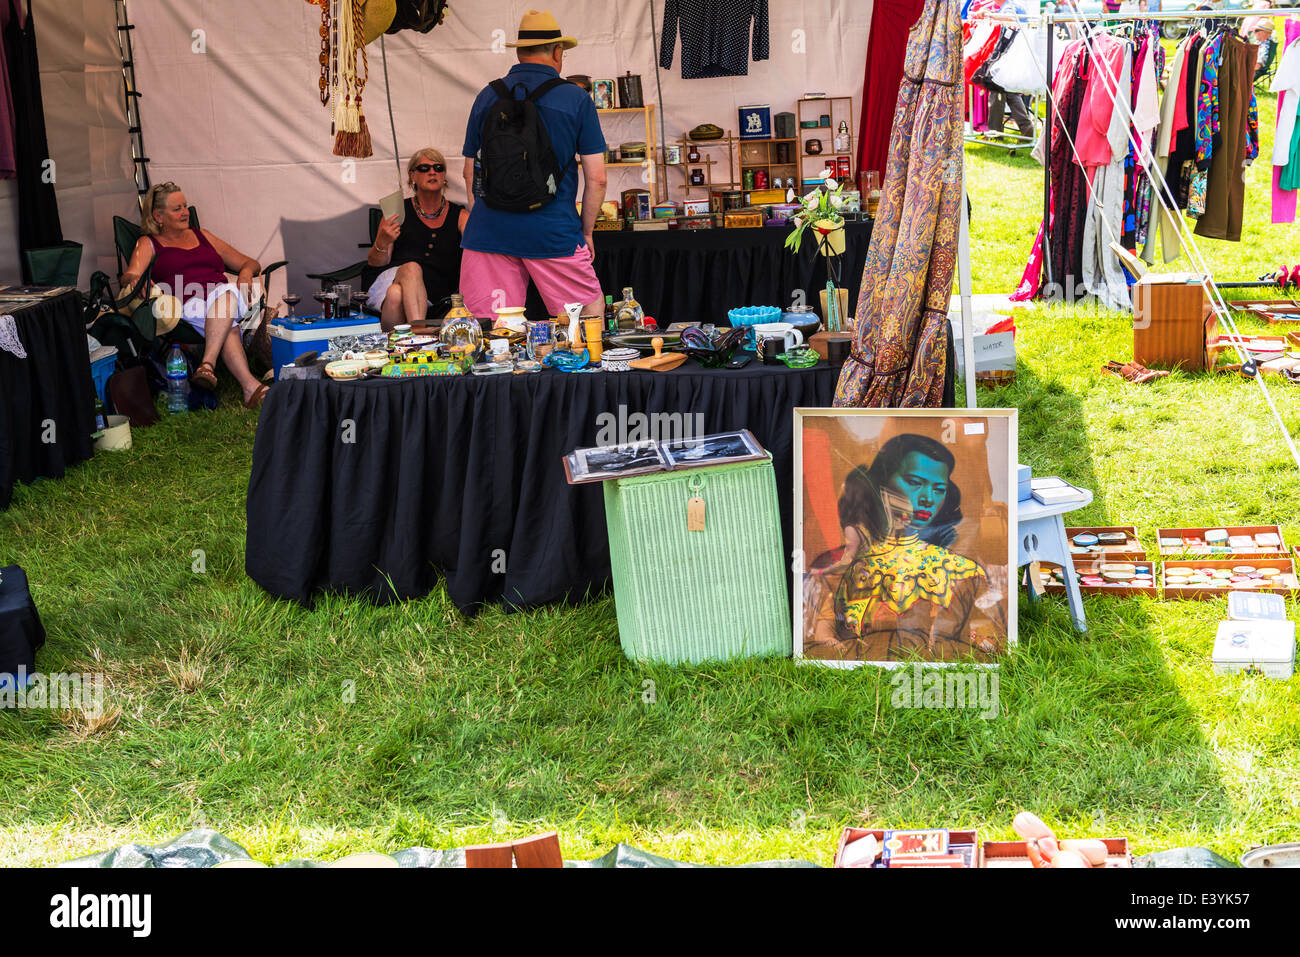 East Devon, England. A bric a brac stall at a Fete and garden party selling miscellaneous goods. Stock Photo